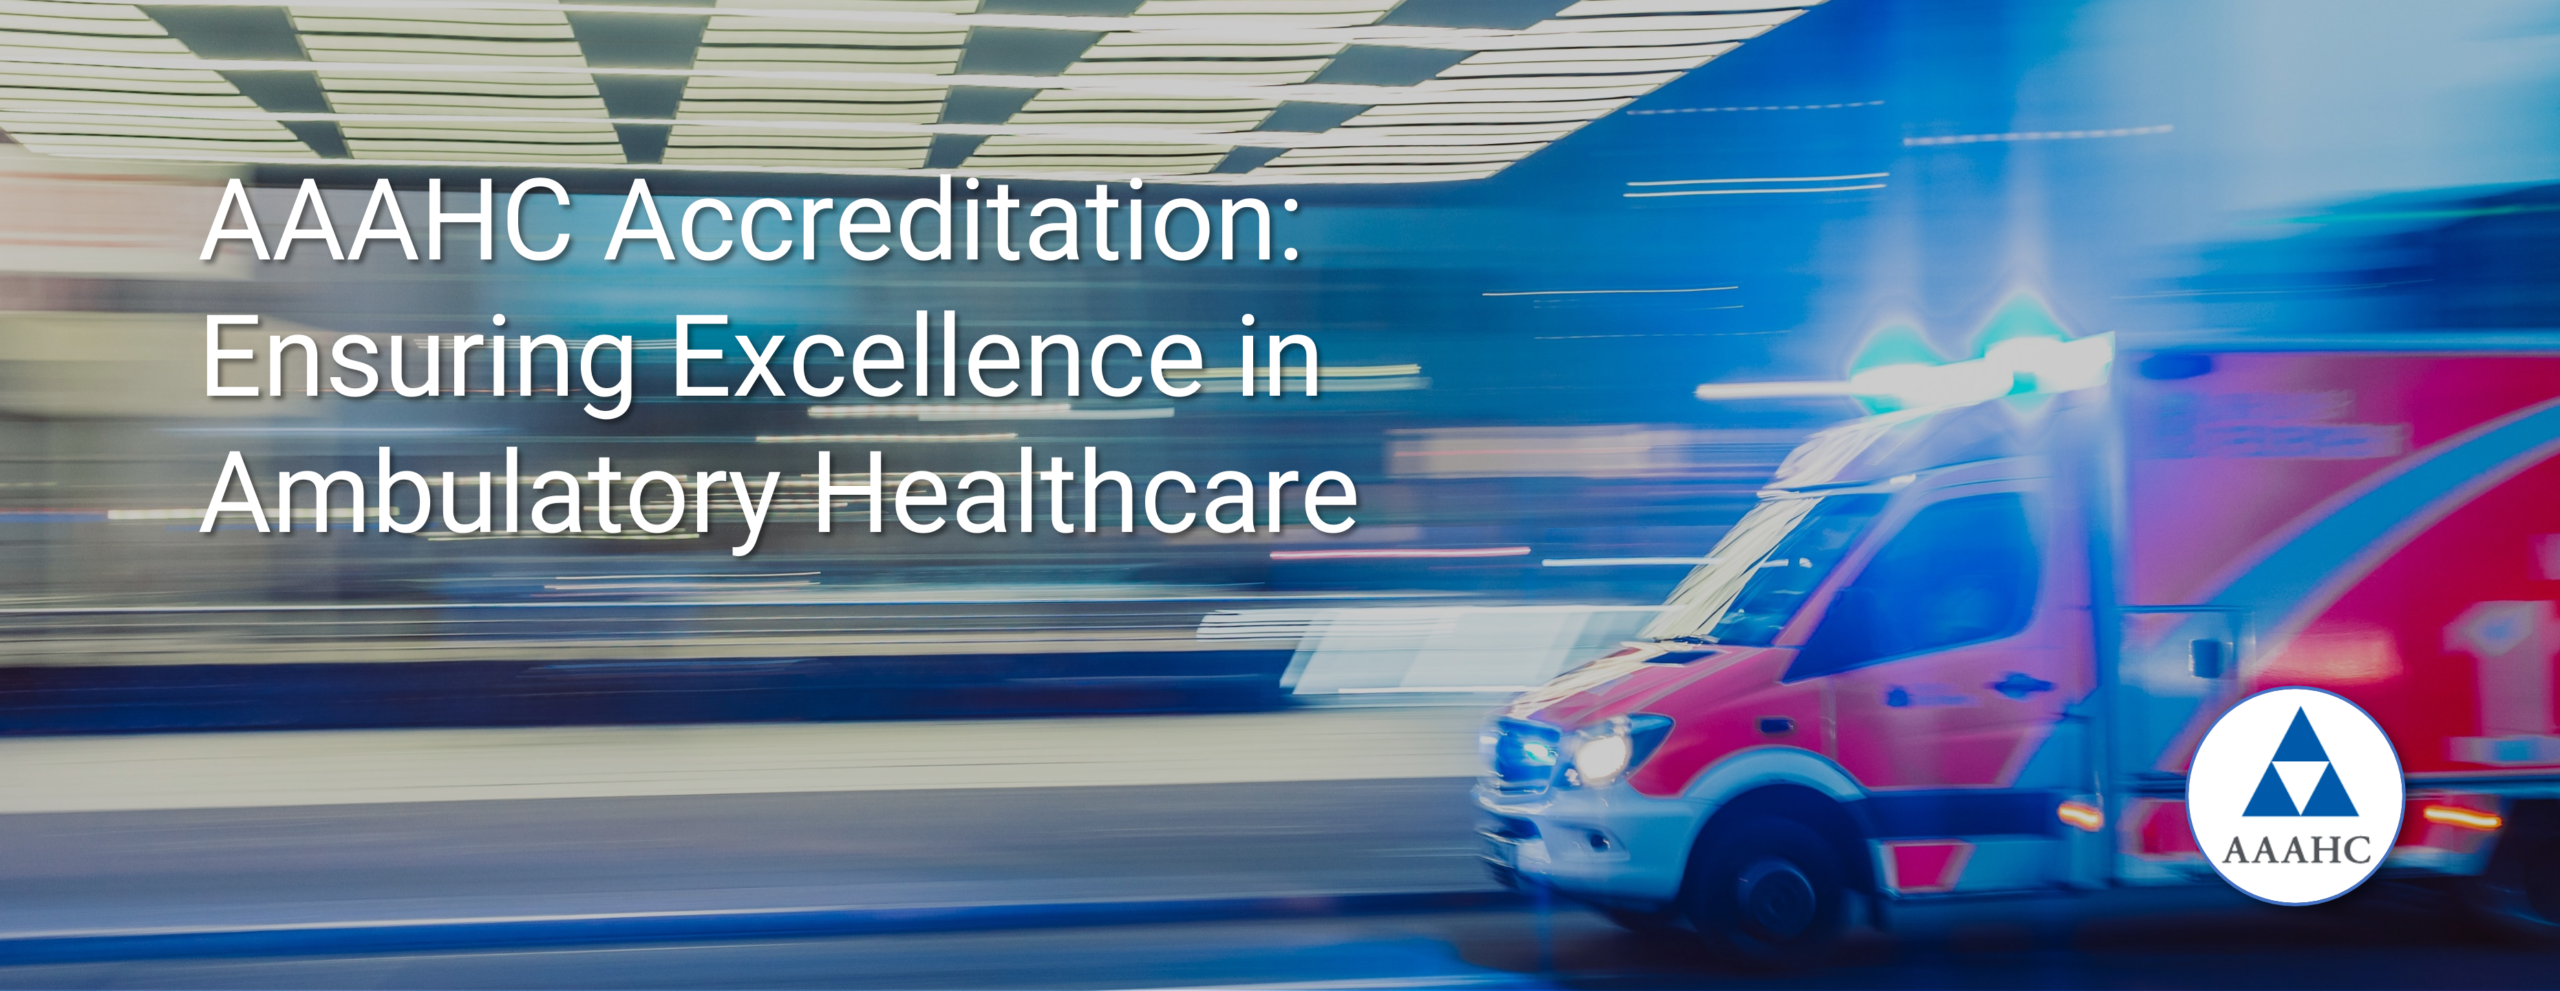 Aaahc Accreditation Standards: Ensuring Excellence In Ambulatory Healthcare